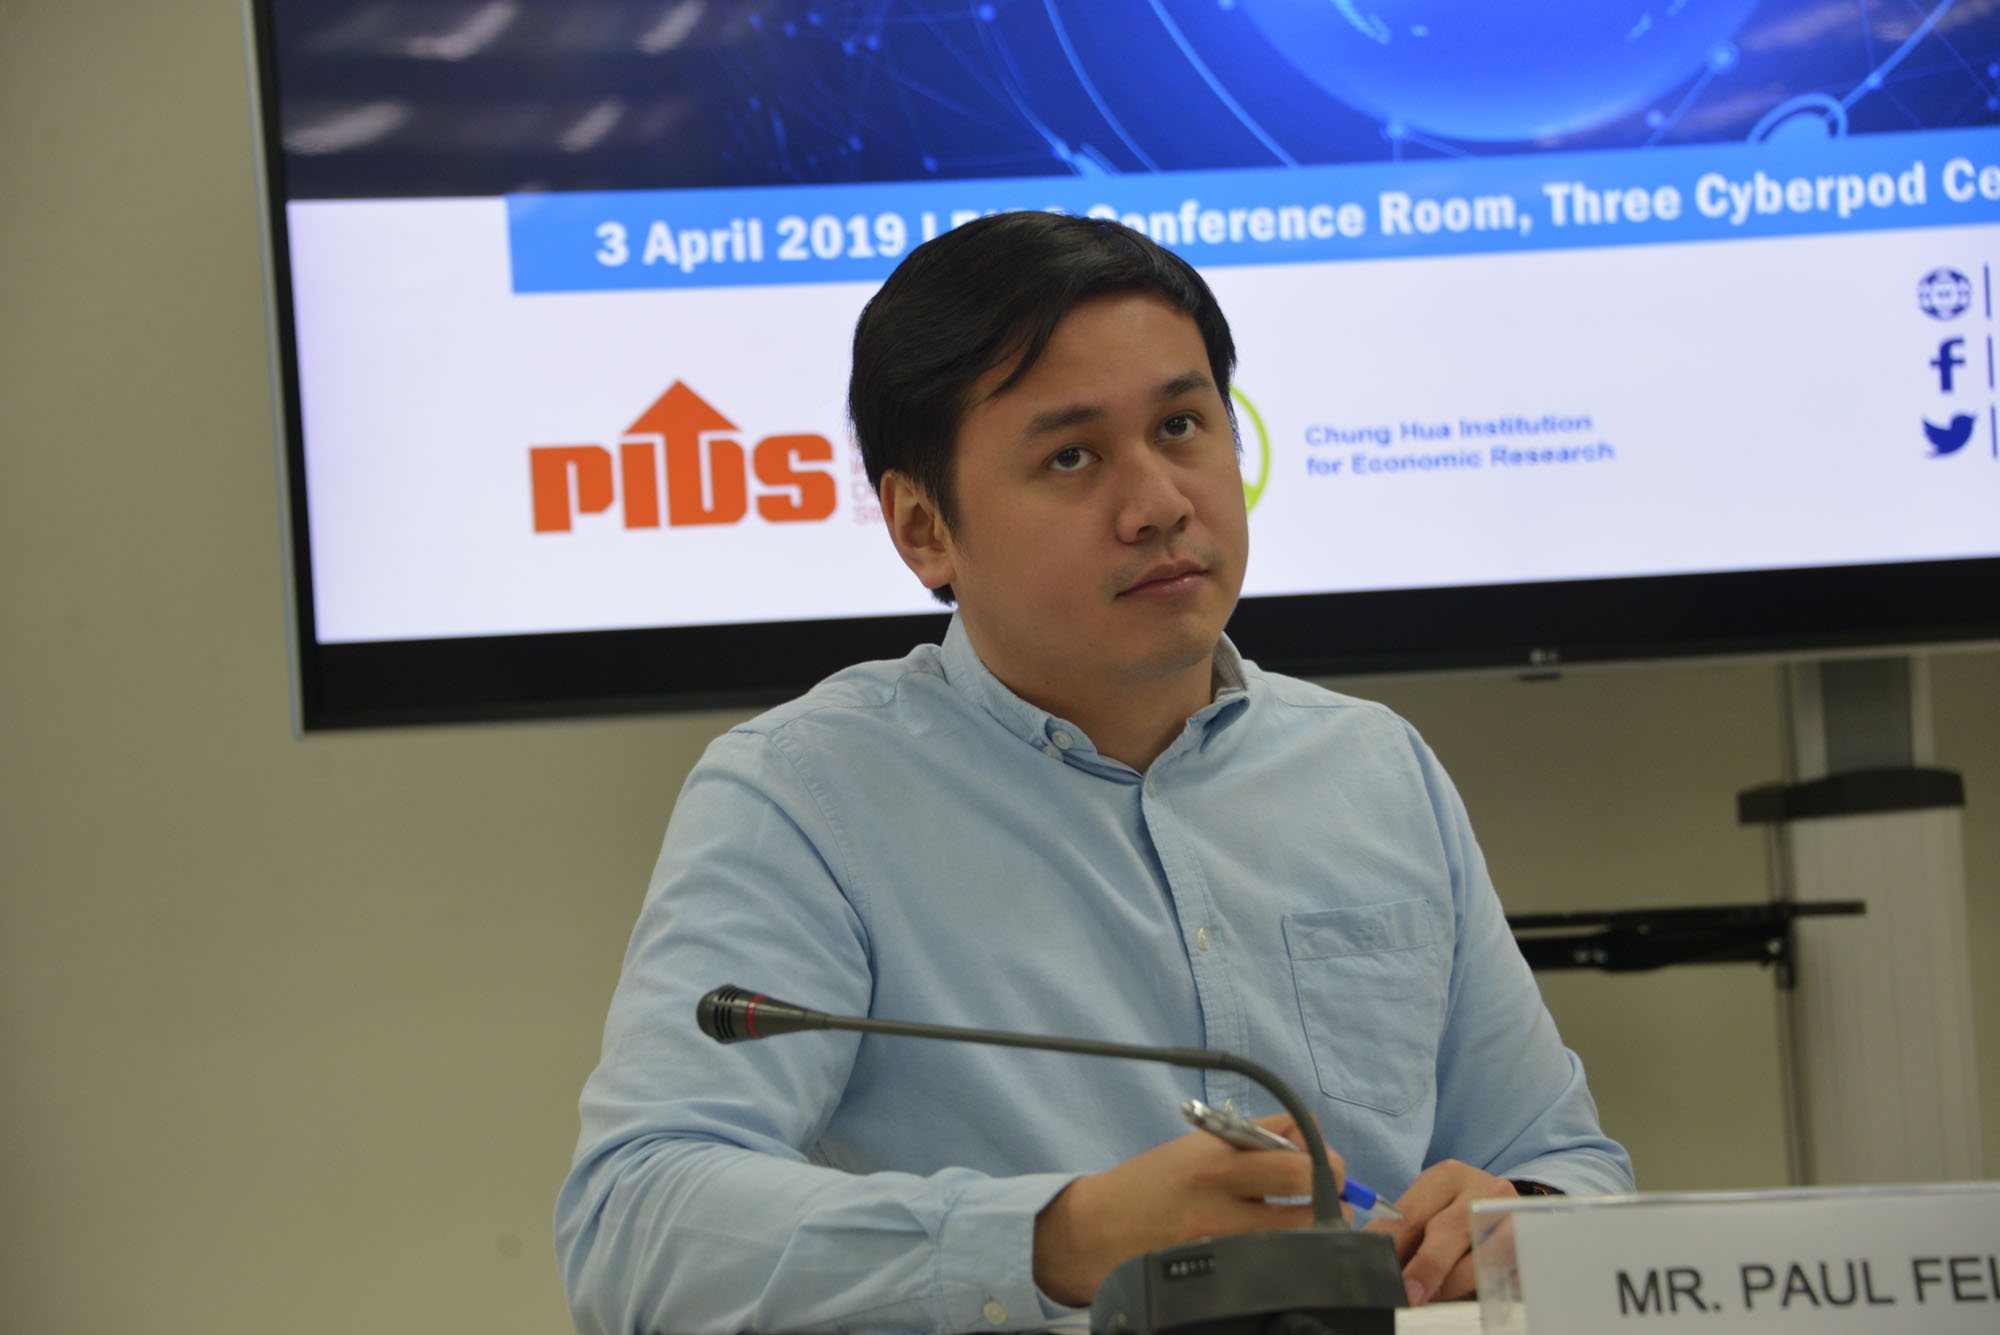 The Global Economic Environment: A Symposium on the Global Economy and What it Means for the Philippines-pids-cier-14-20190493.jpg